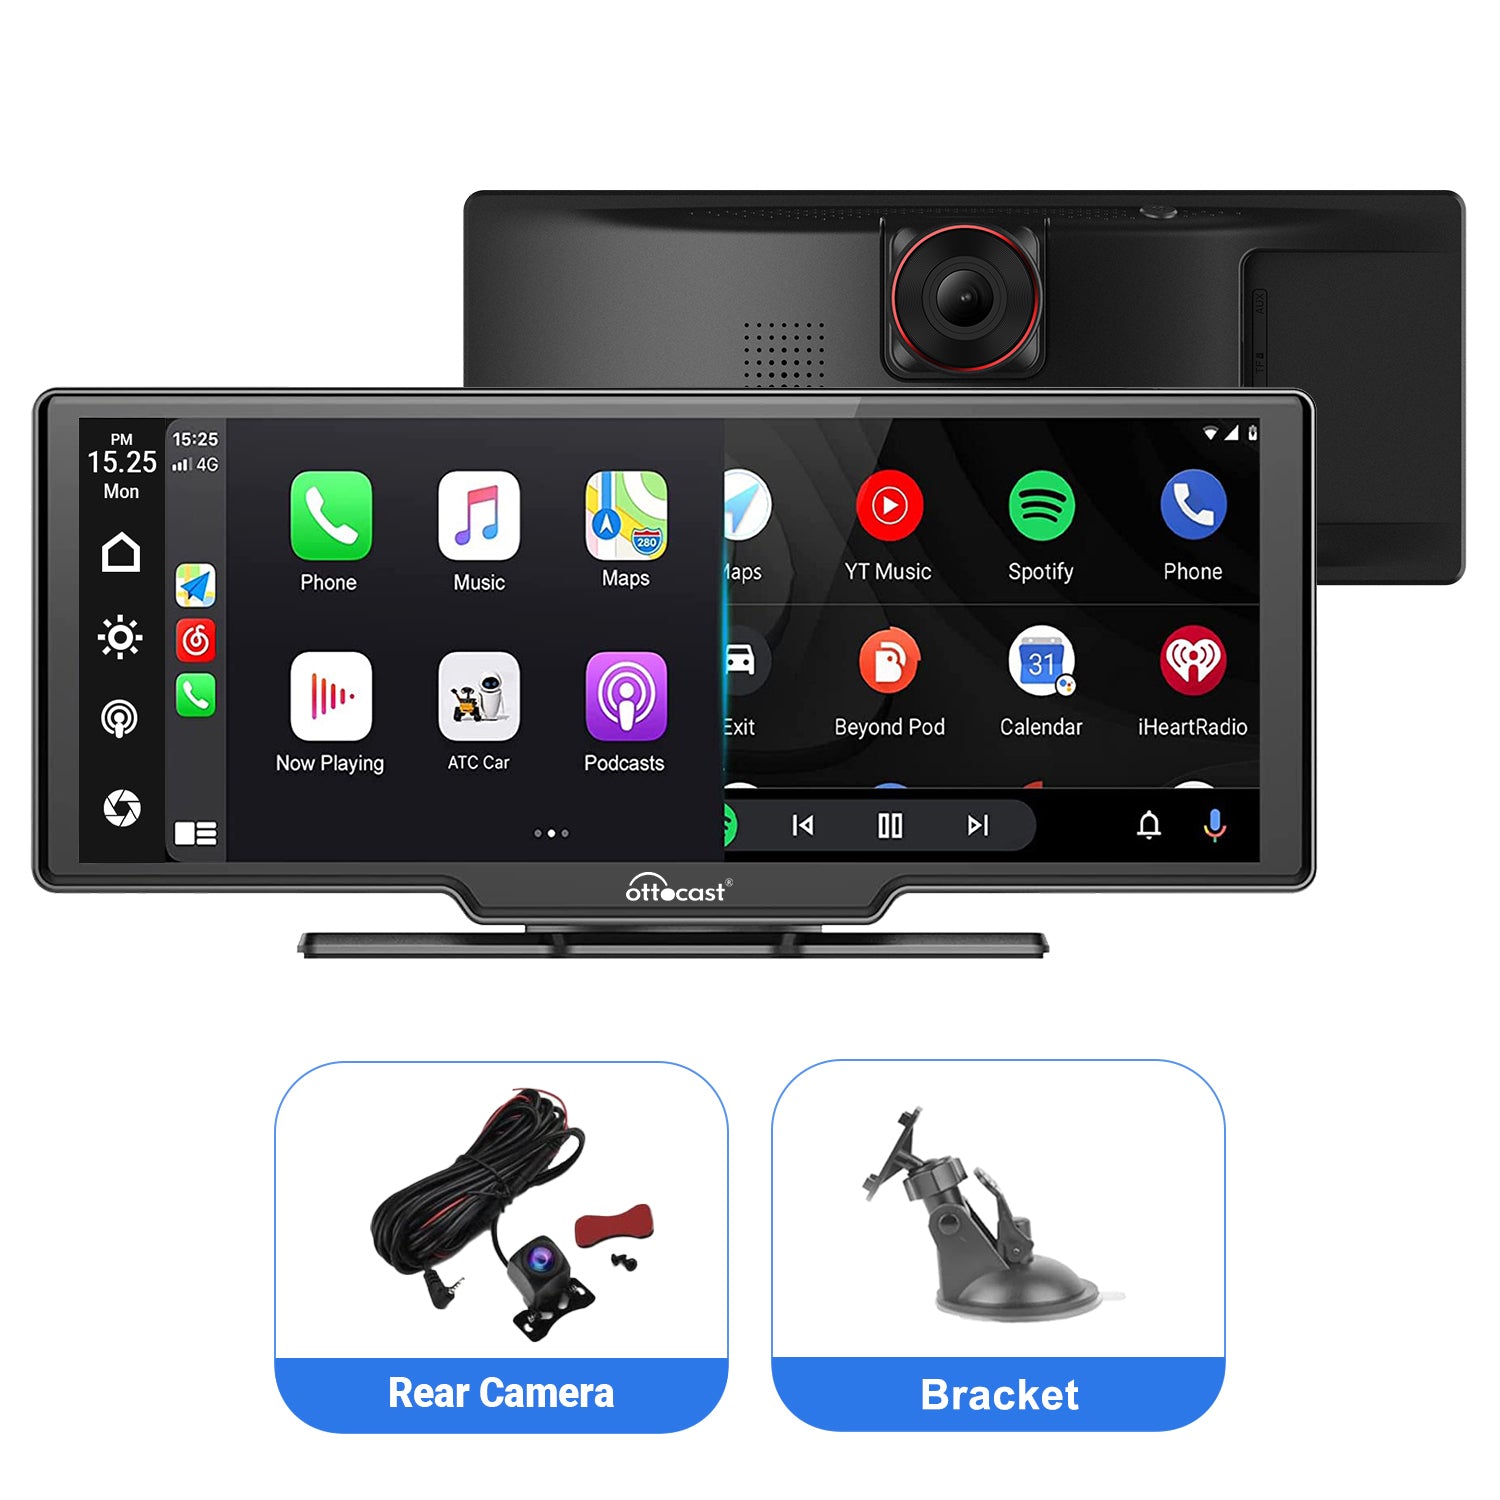 Ottoscreen Max Portable Apple Carplay & Android Auto Screen For Car with 2.5K Dash Cam - 10.26 inch